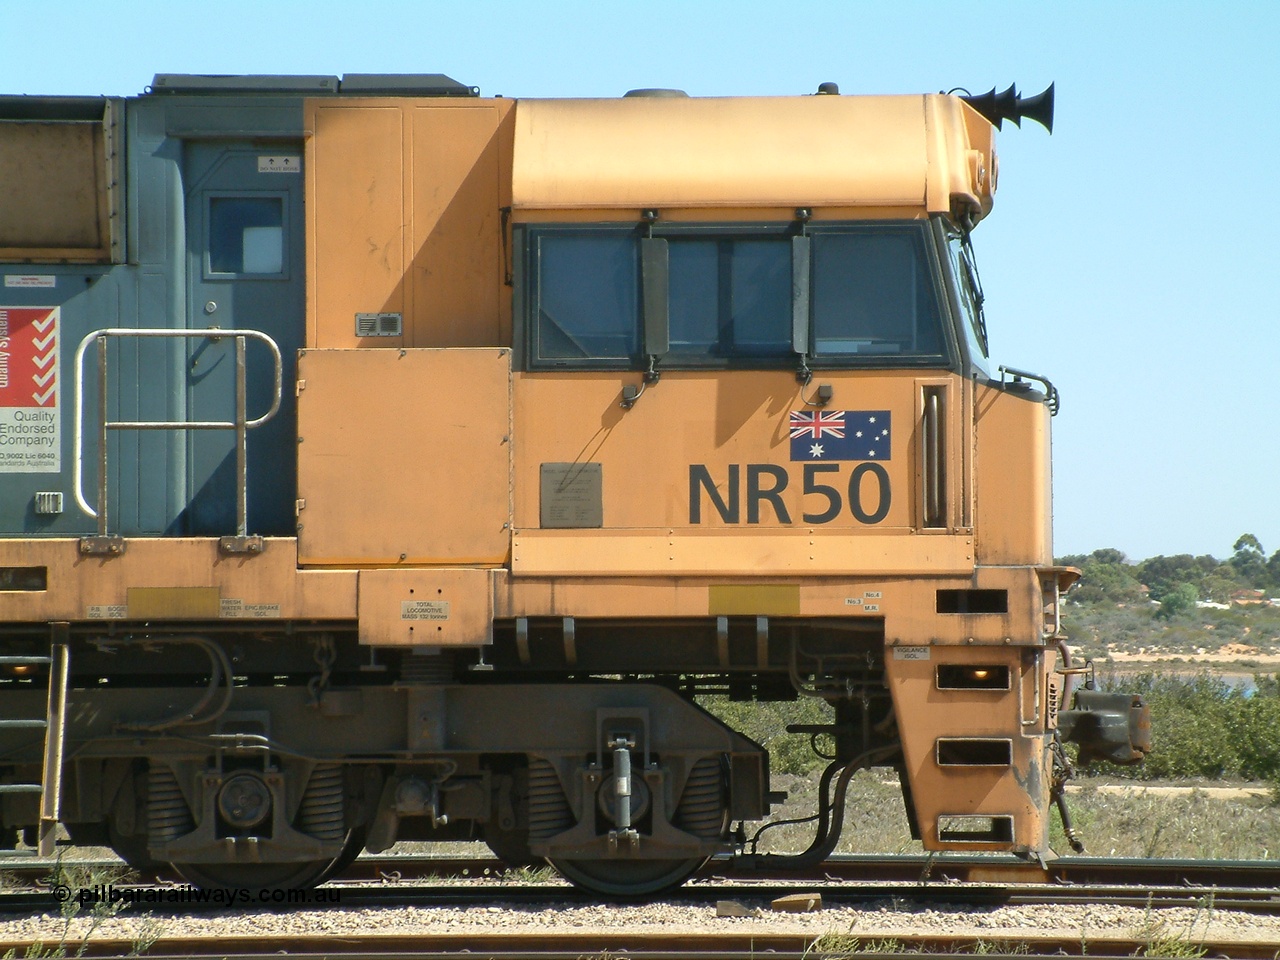 030404 125349
Port Augusta Spencer Junction yard, a Perth bound intermodal awaits departure time on 13 Road behind National Rail NR class units built by Goninan as GE Cv40-9i models, NR 50 serial 7250-08 / 97-252. 4th April 2003.
Keywords: NR-class;NR50;Goninan;GE;Cv40-9i;7250-08/97-252;